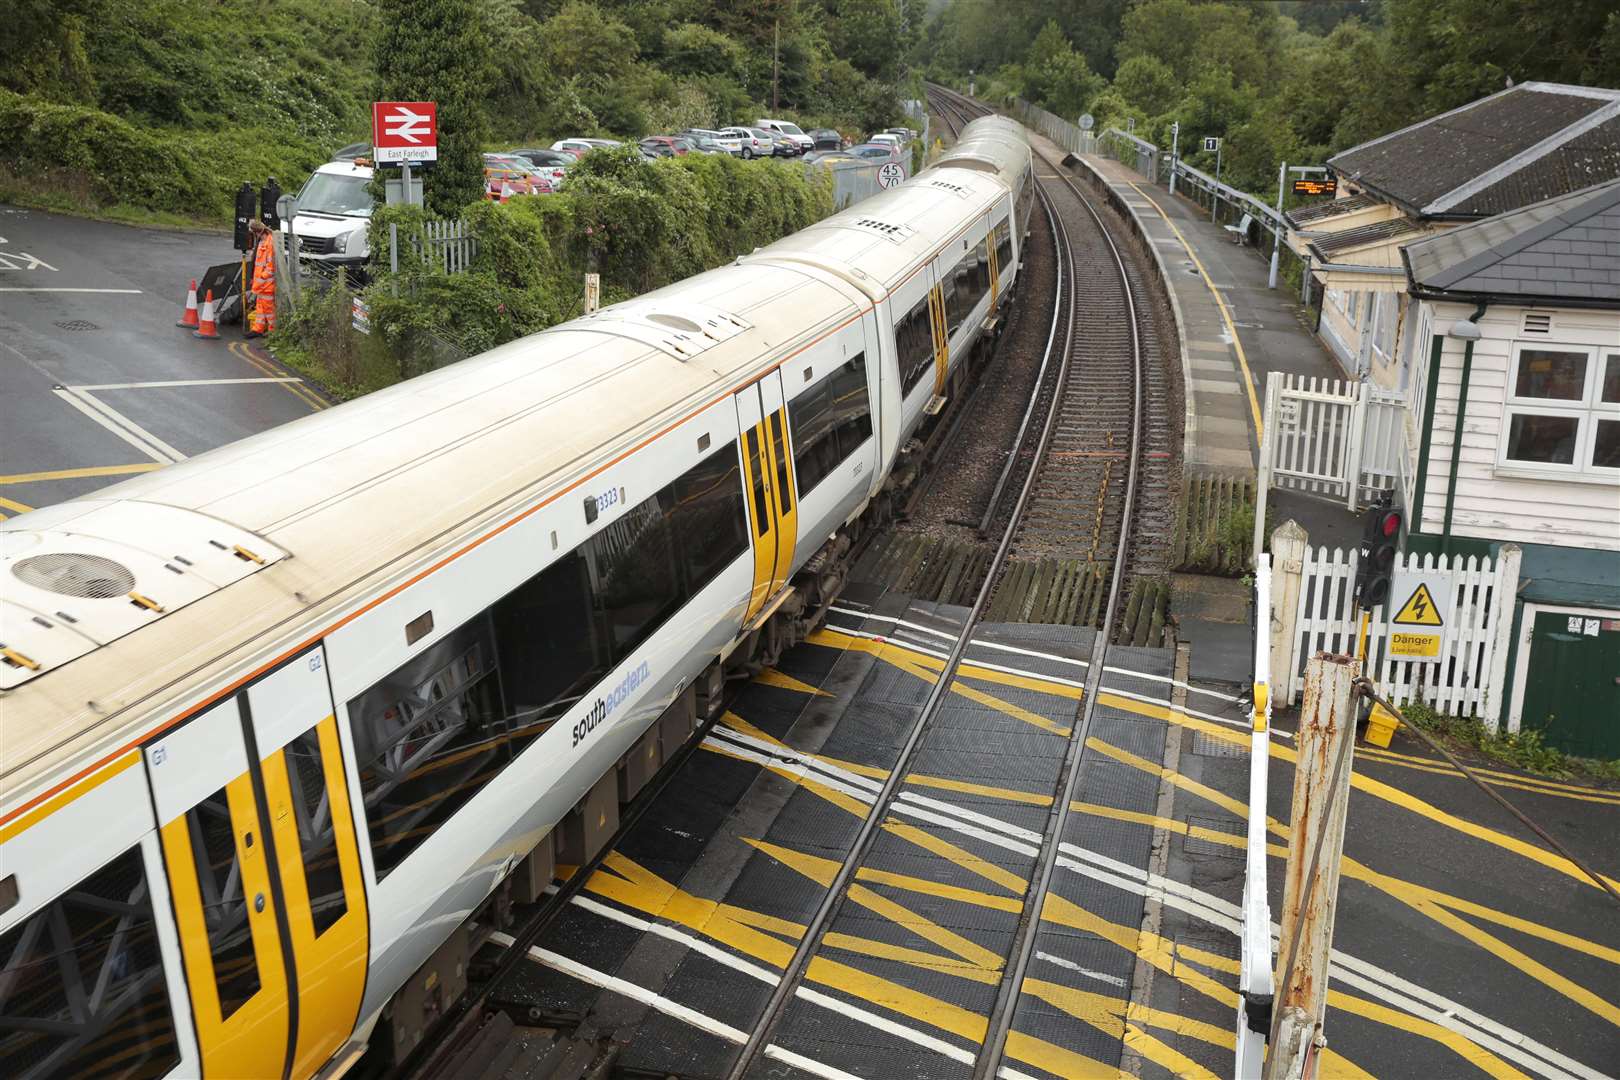 Network Rail has introduced safety measures at East Farleigh